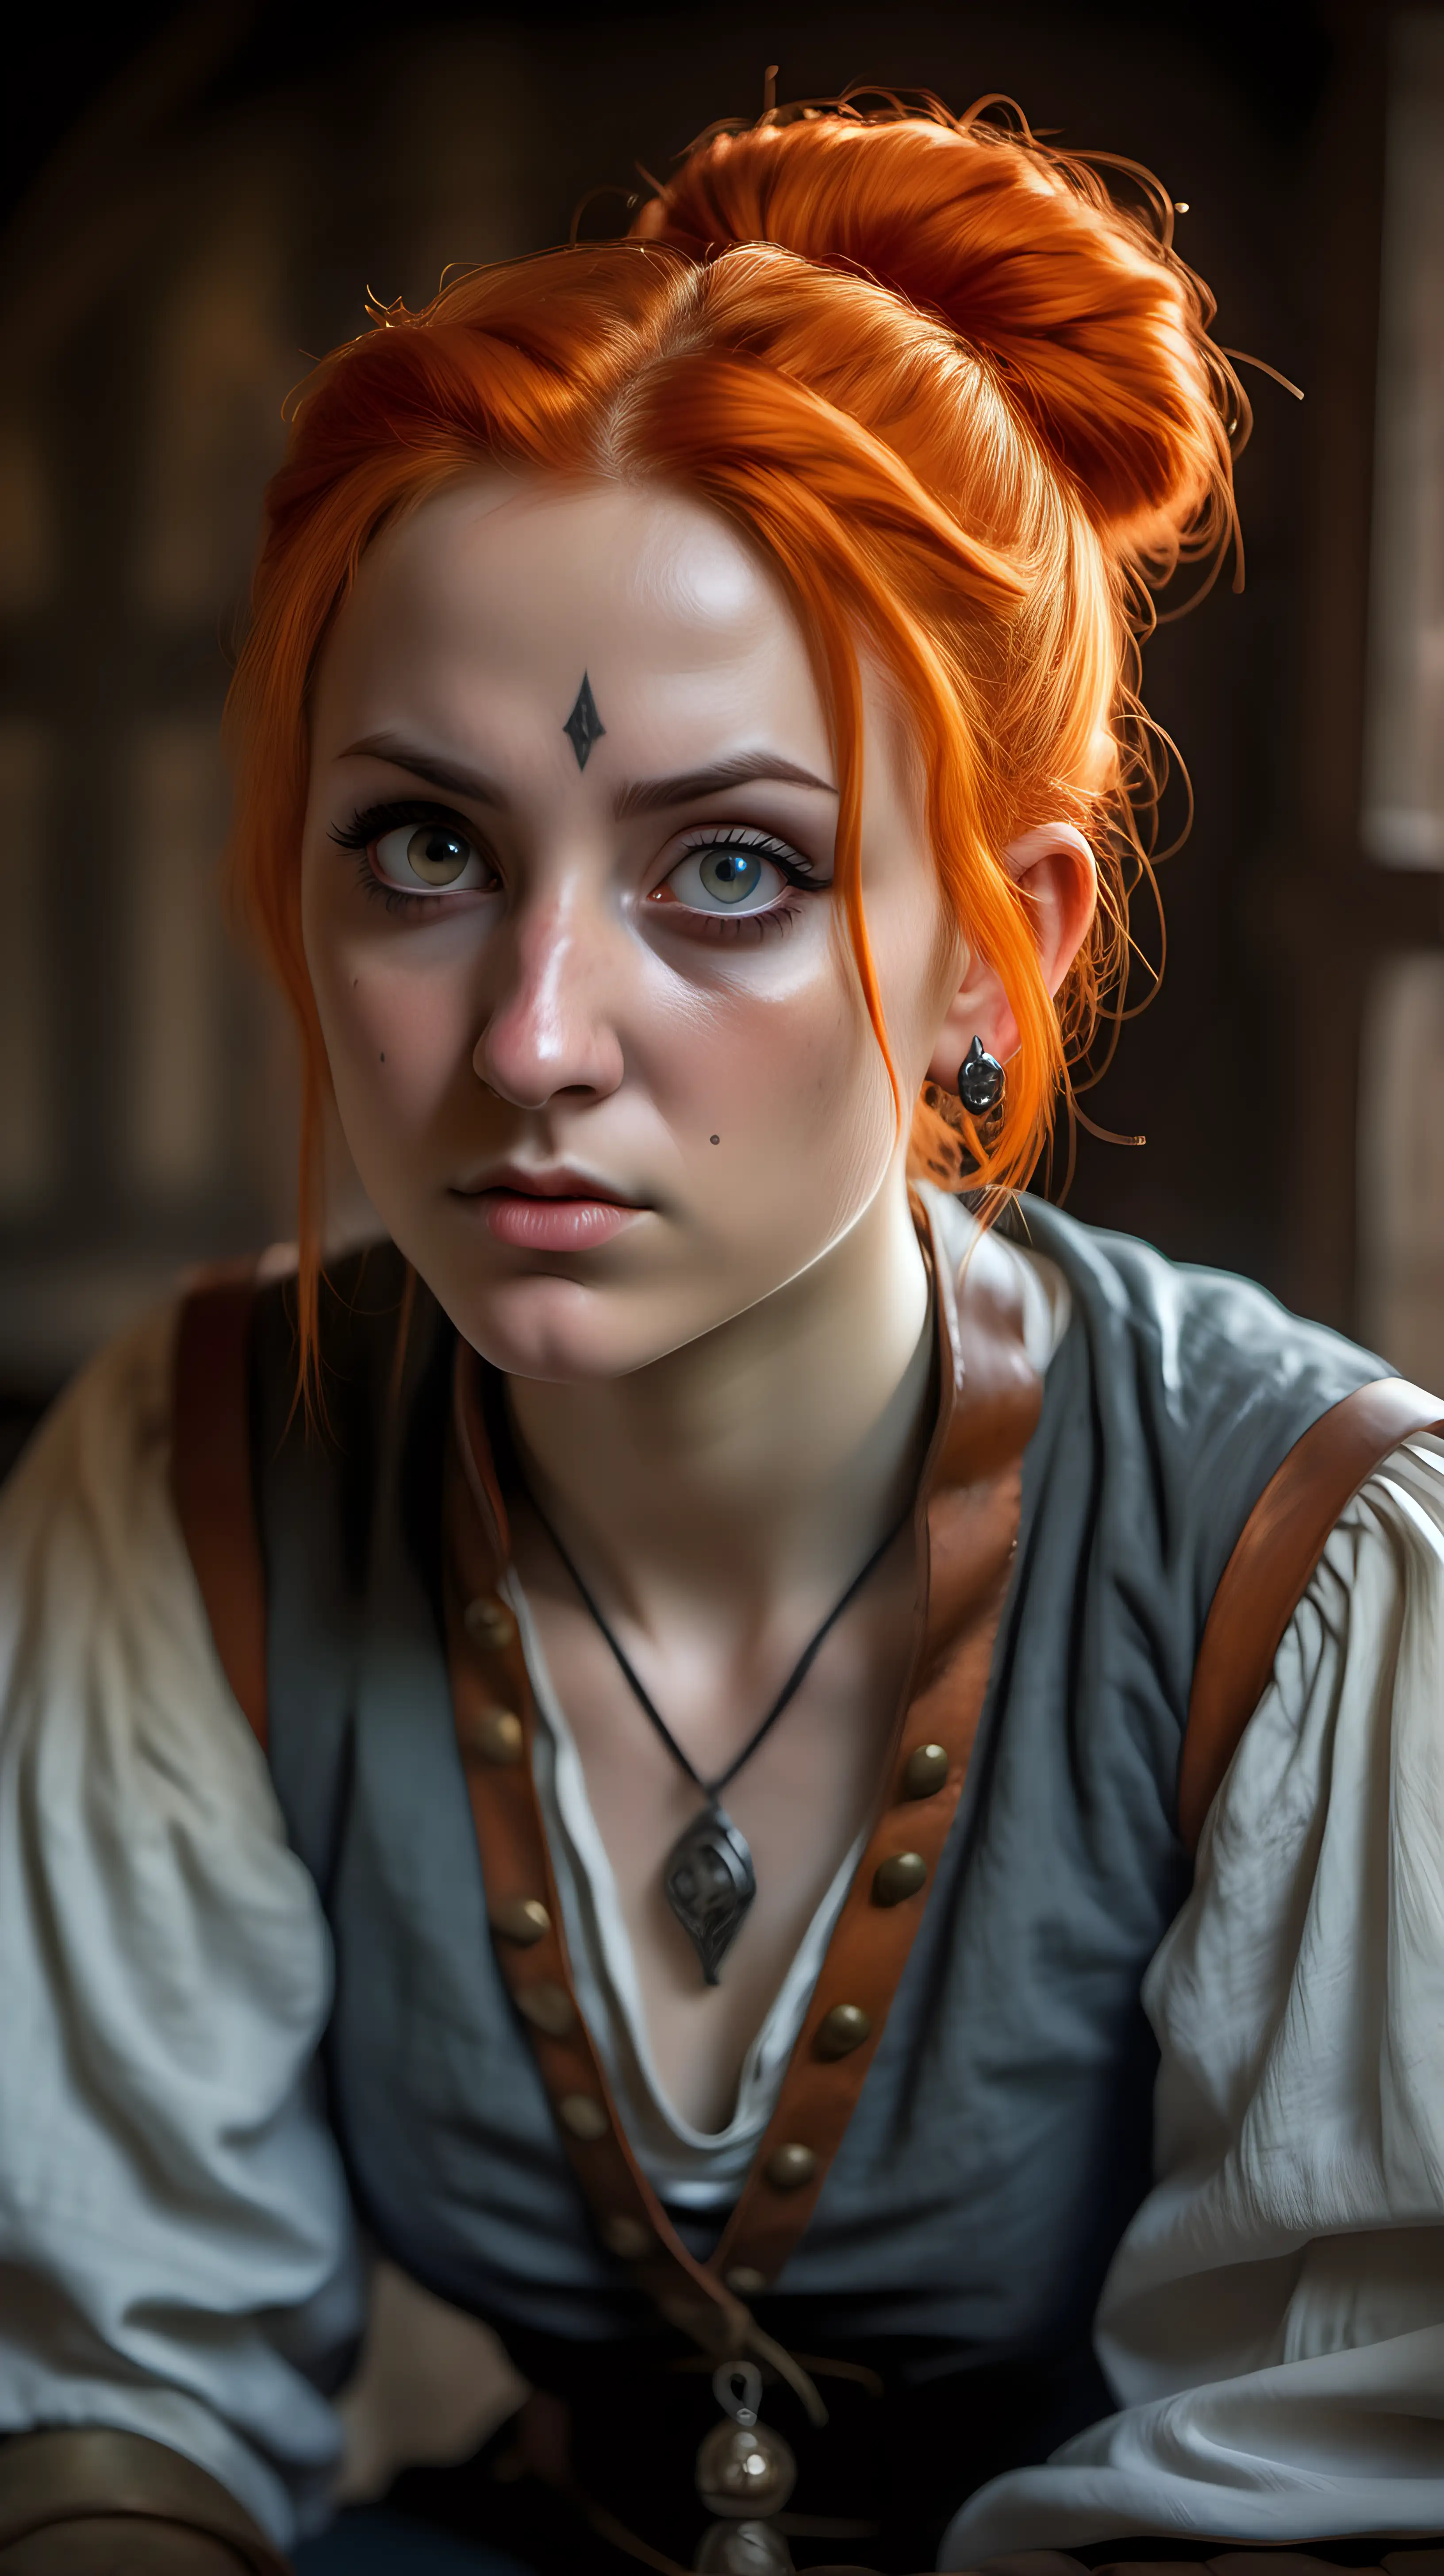 female rogue, pensive expression, gray eyes, cute, strong, crooked nose, amulet necklace, small stud earrings, bright orange hair in a tight bun, detailed eyes, detailed face, medieval fantasy, small inn bedroom, sitting, super detailed, hyper realistic photography